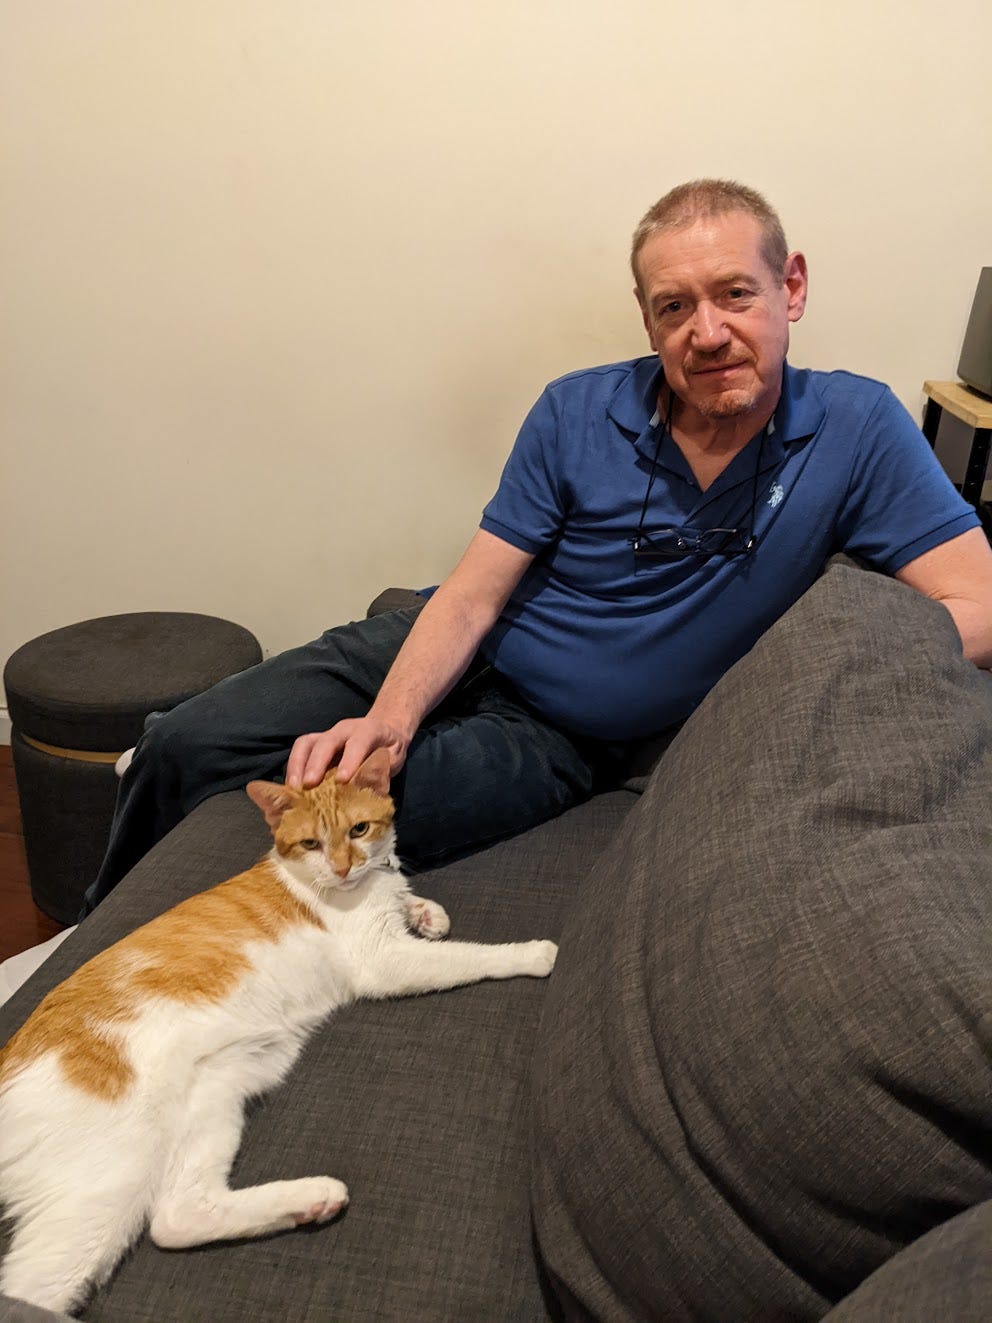 A white man with blond hair wearing a blue polo shirt and jeans sits on a couch petting a white and red cat